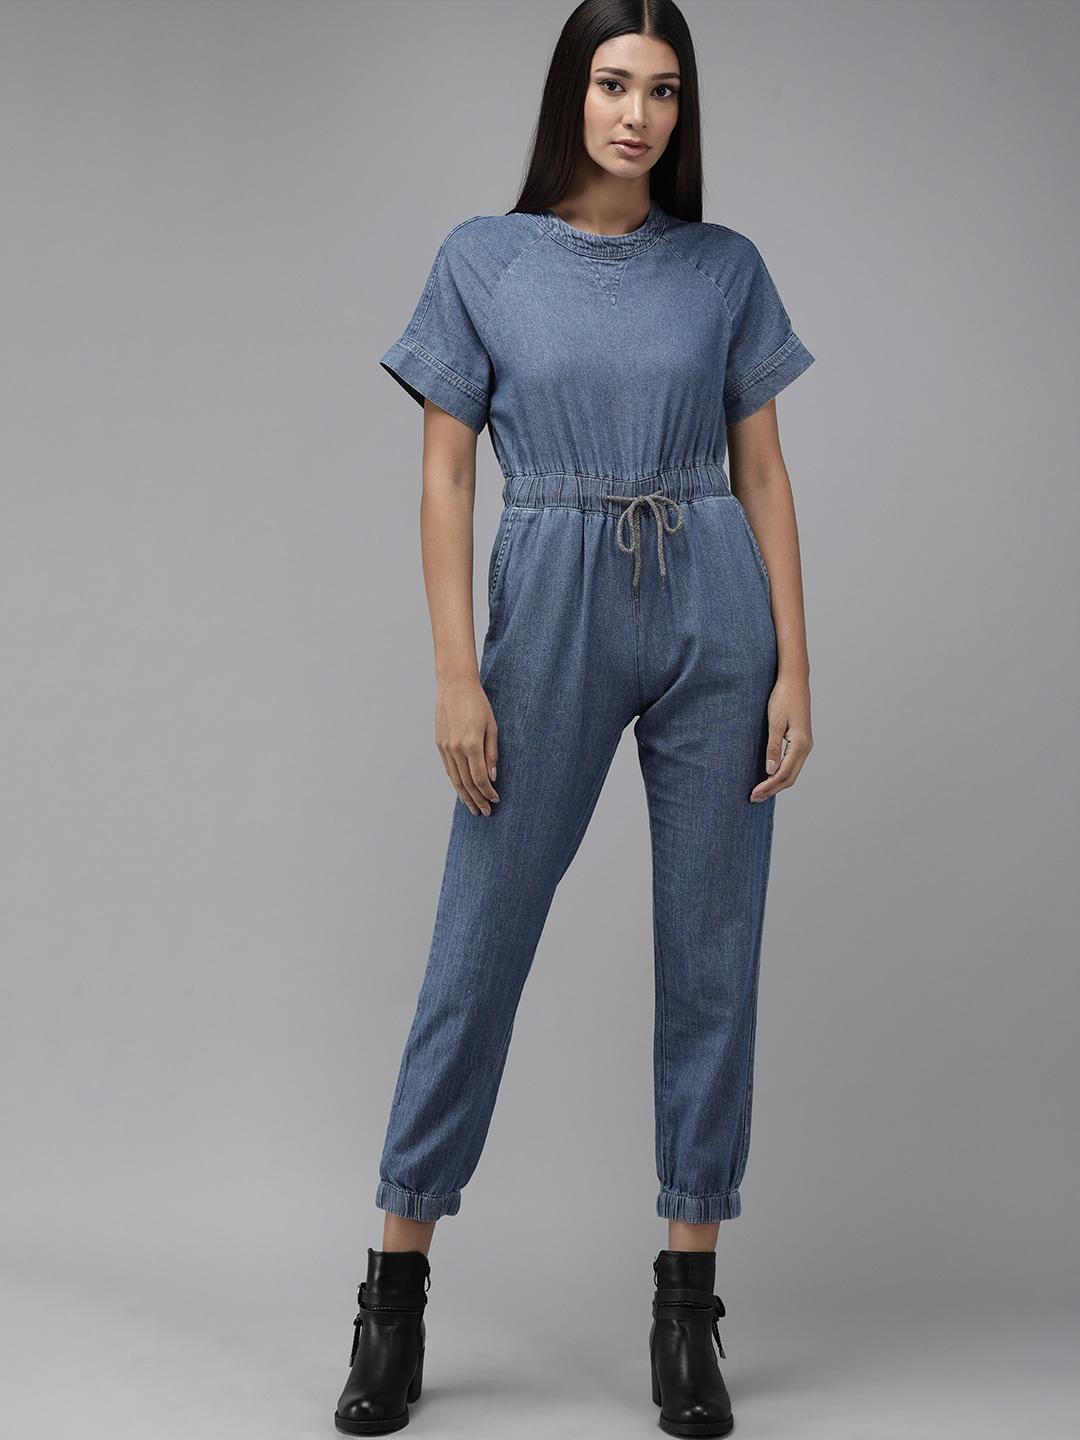 the roadster lifestyle co blue jogger fit basic denim cropped jumpsuit with waist tie-ups